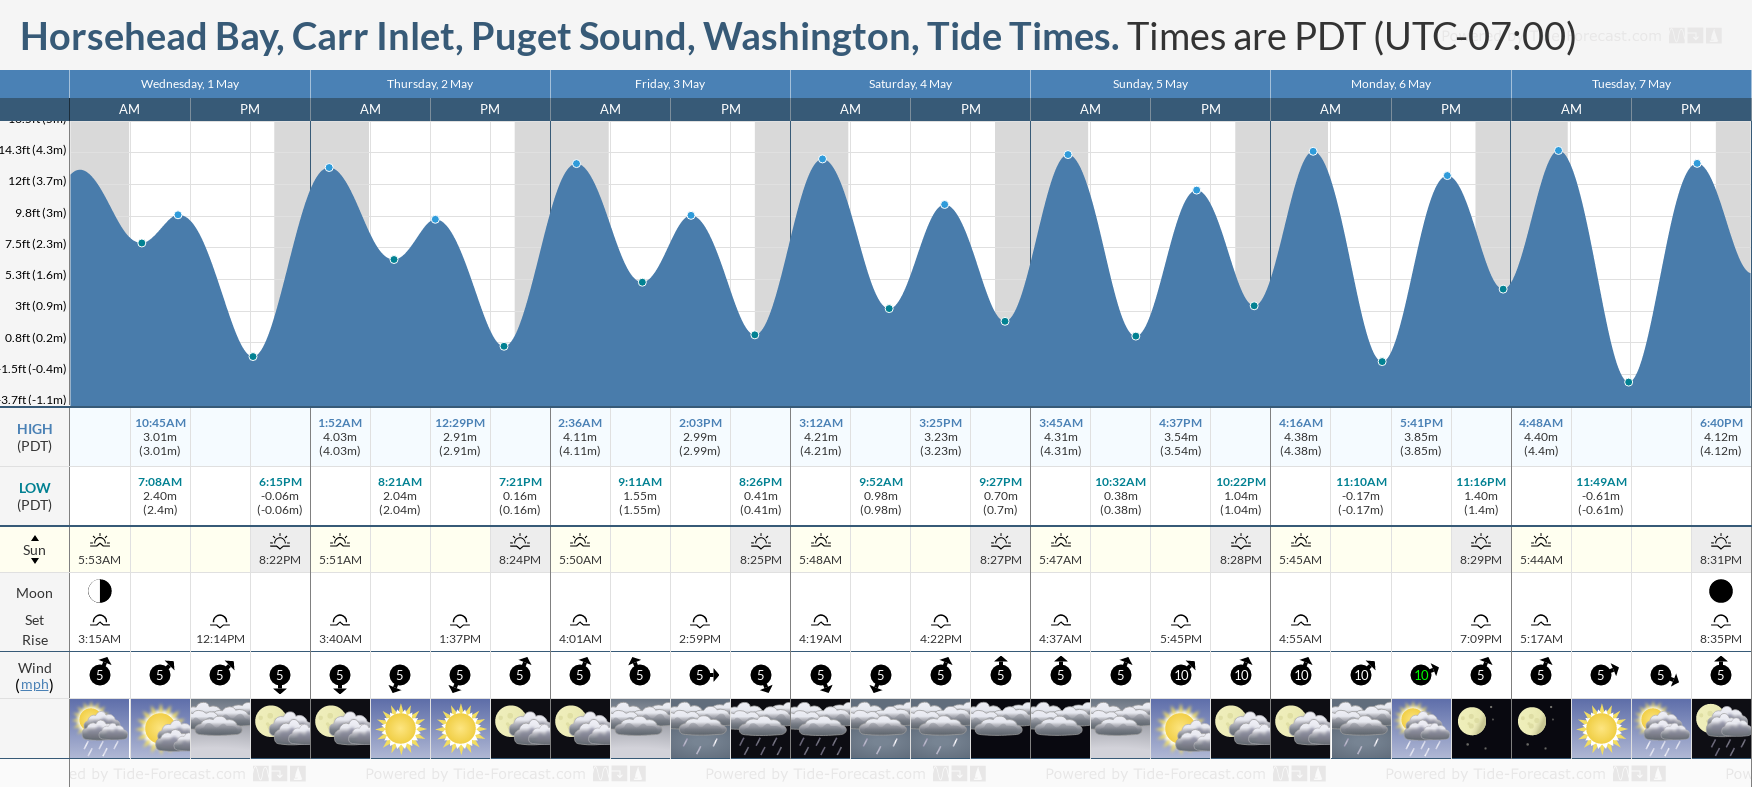 Horsehead Bay, Carr Inlet, Puget Sound, Washington Tide Chart including high and low tide tide times for the next 7 days